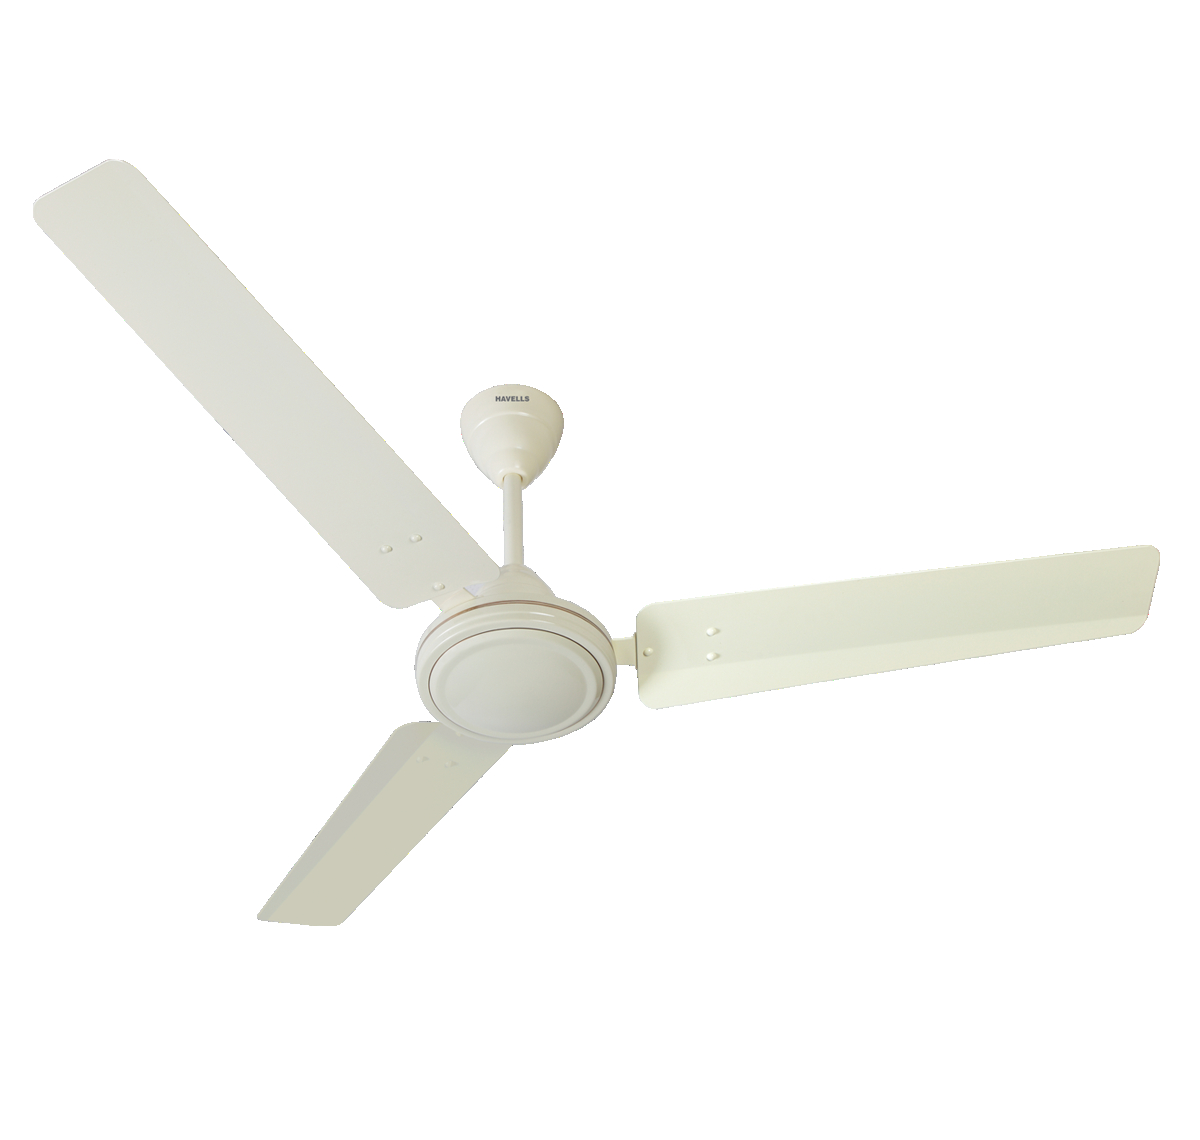 Havells Xp 390 1200 Mm 3 Blade Ceiling Fan Plus Ivory pertaining to dimensions 1200 X 1140